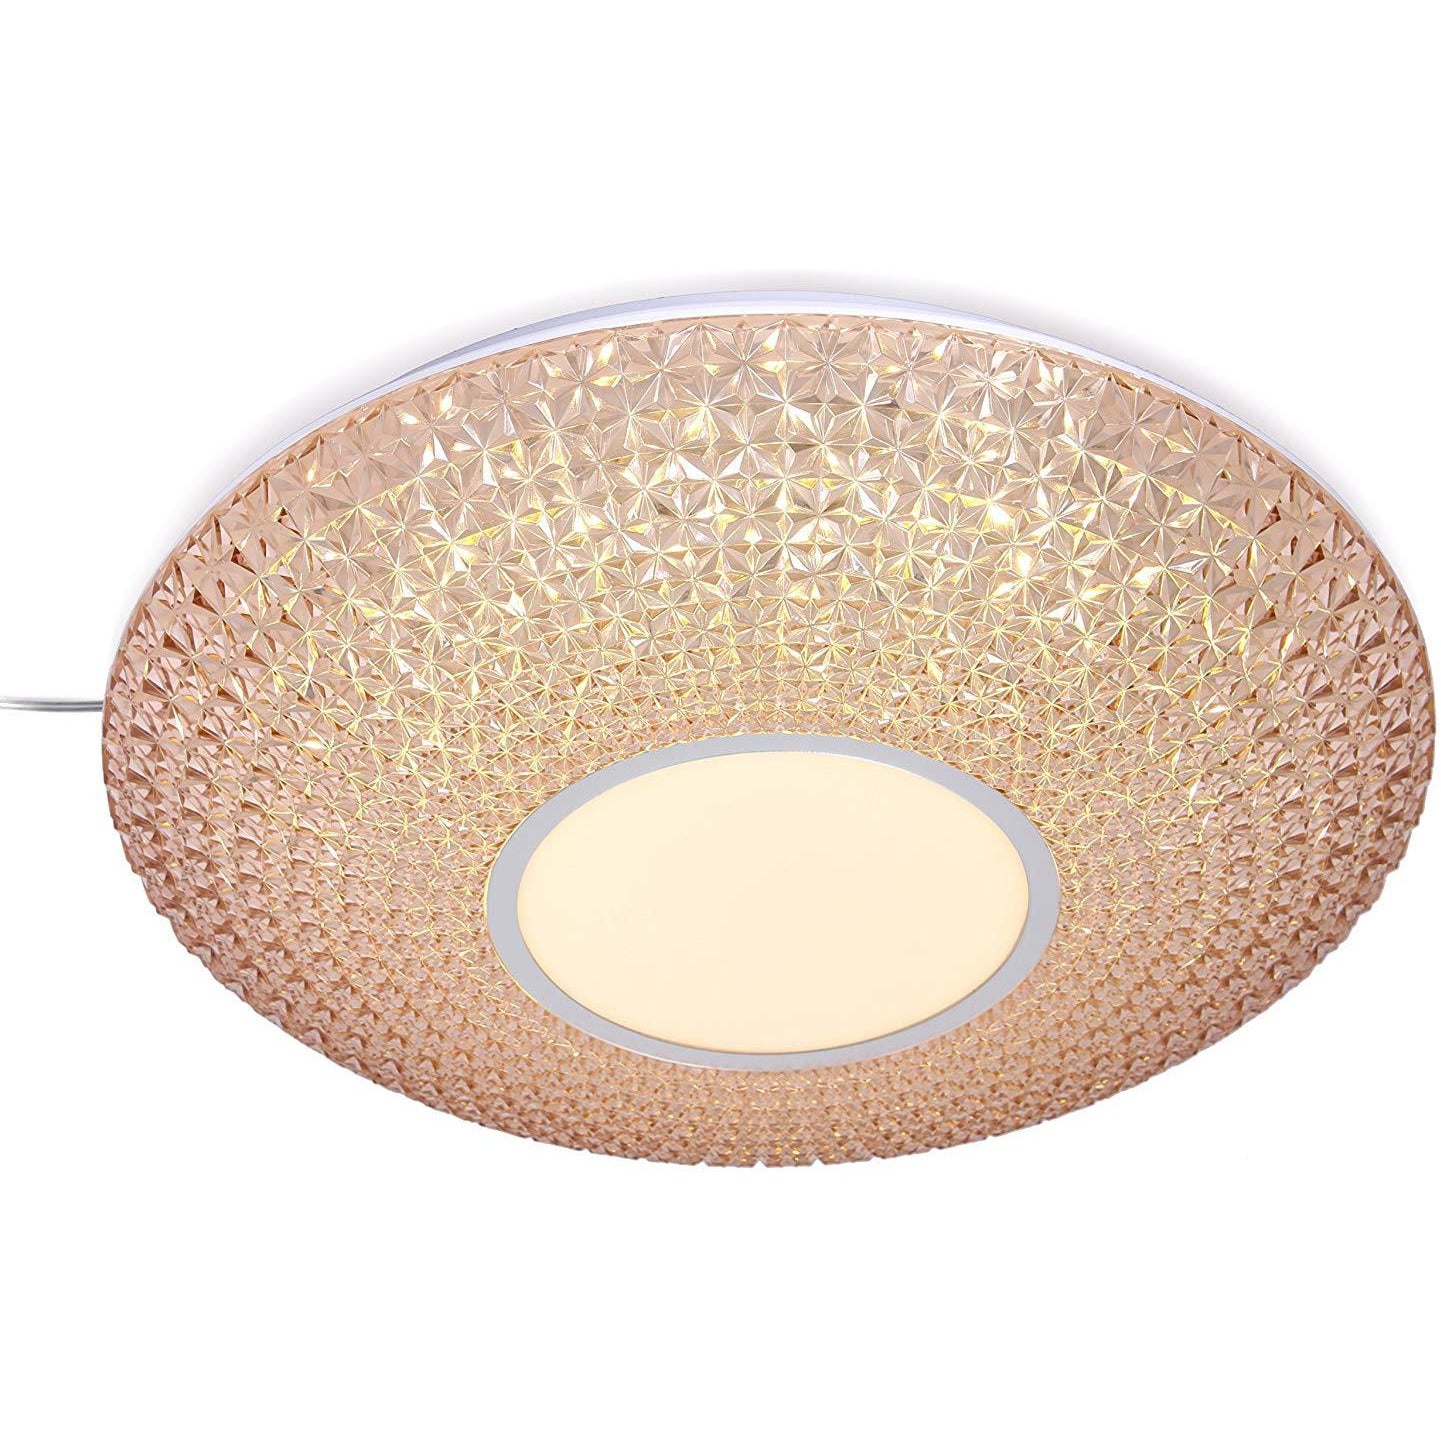 LED Rose Gold Decorative Ceiling Light with Acrylic Shade 2 in 1 Colour 20 watt-Starry Night